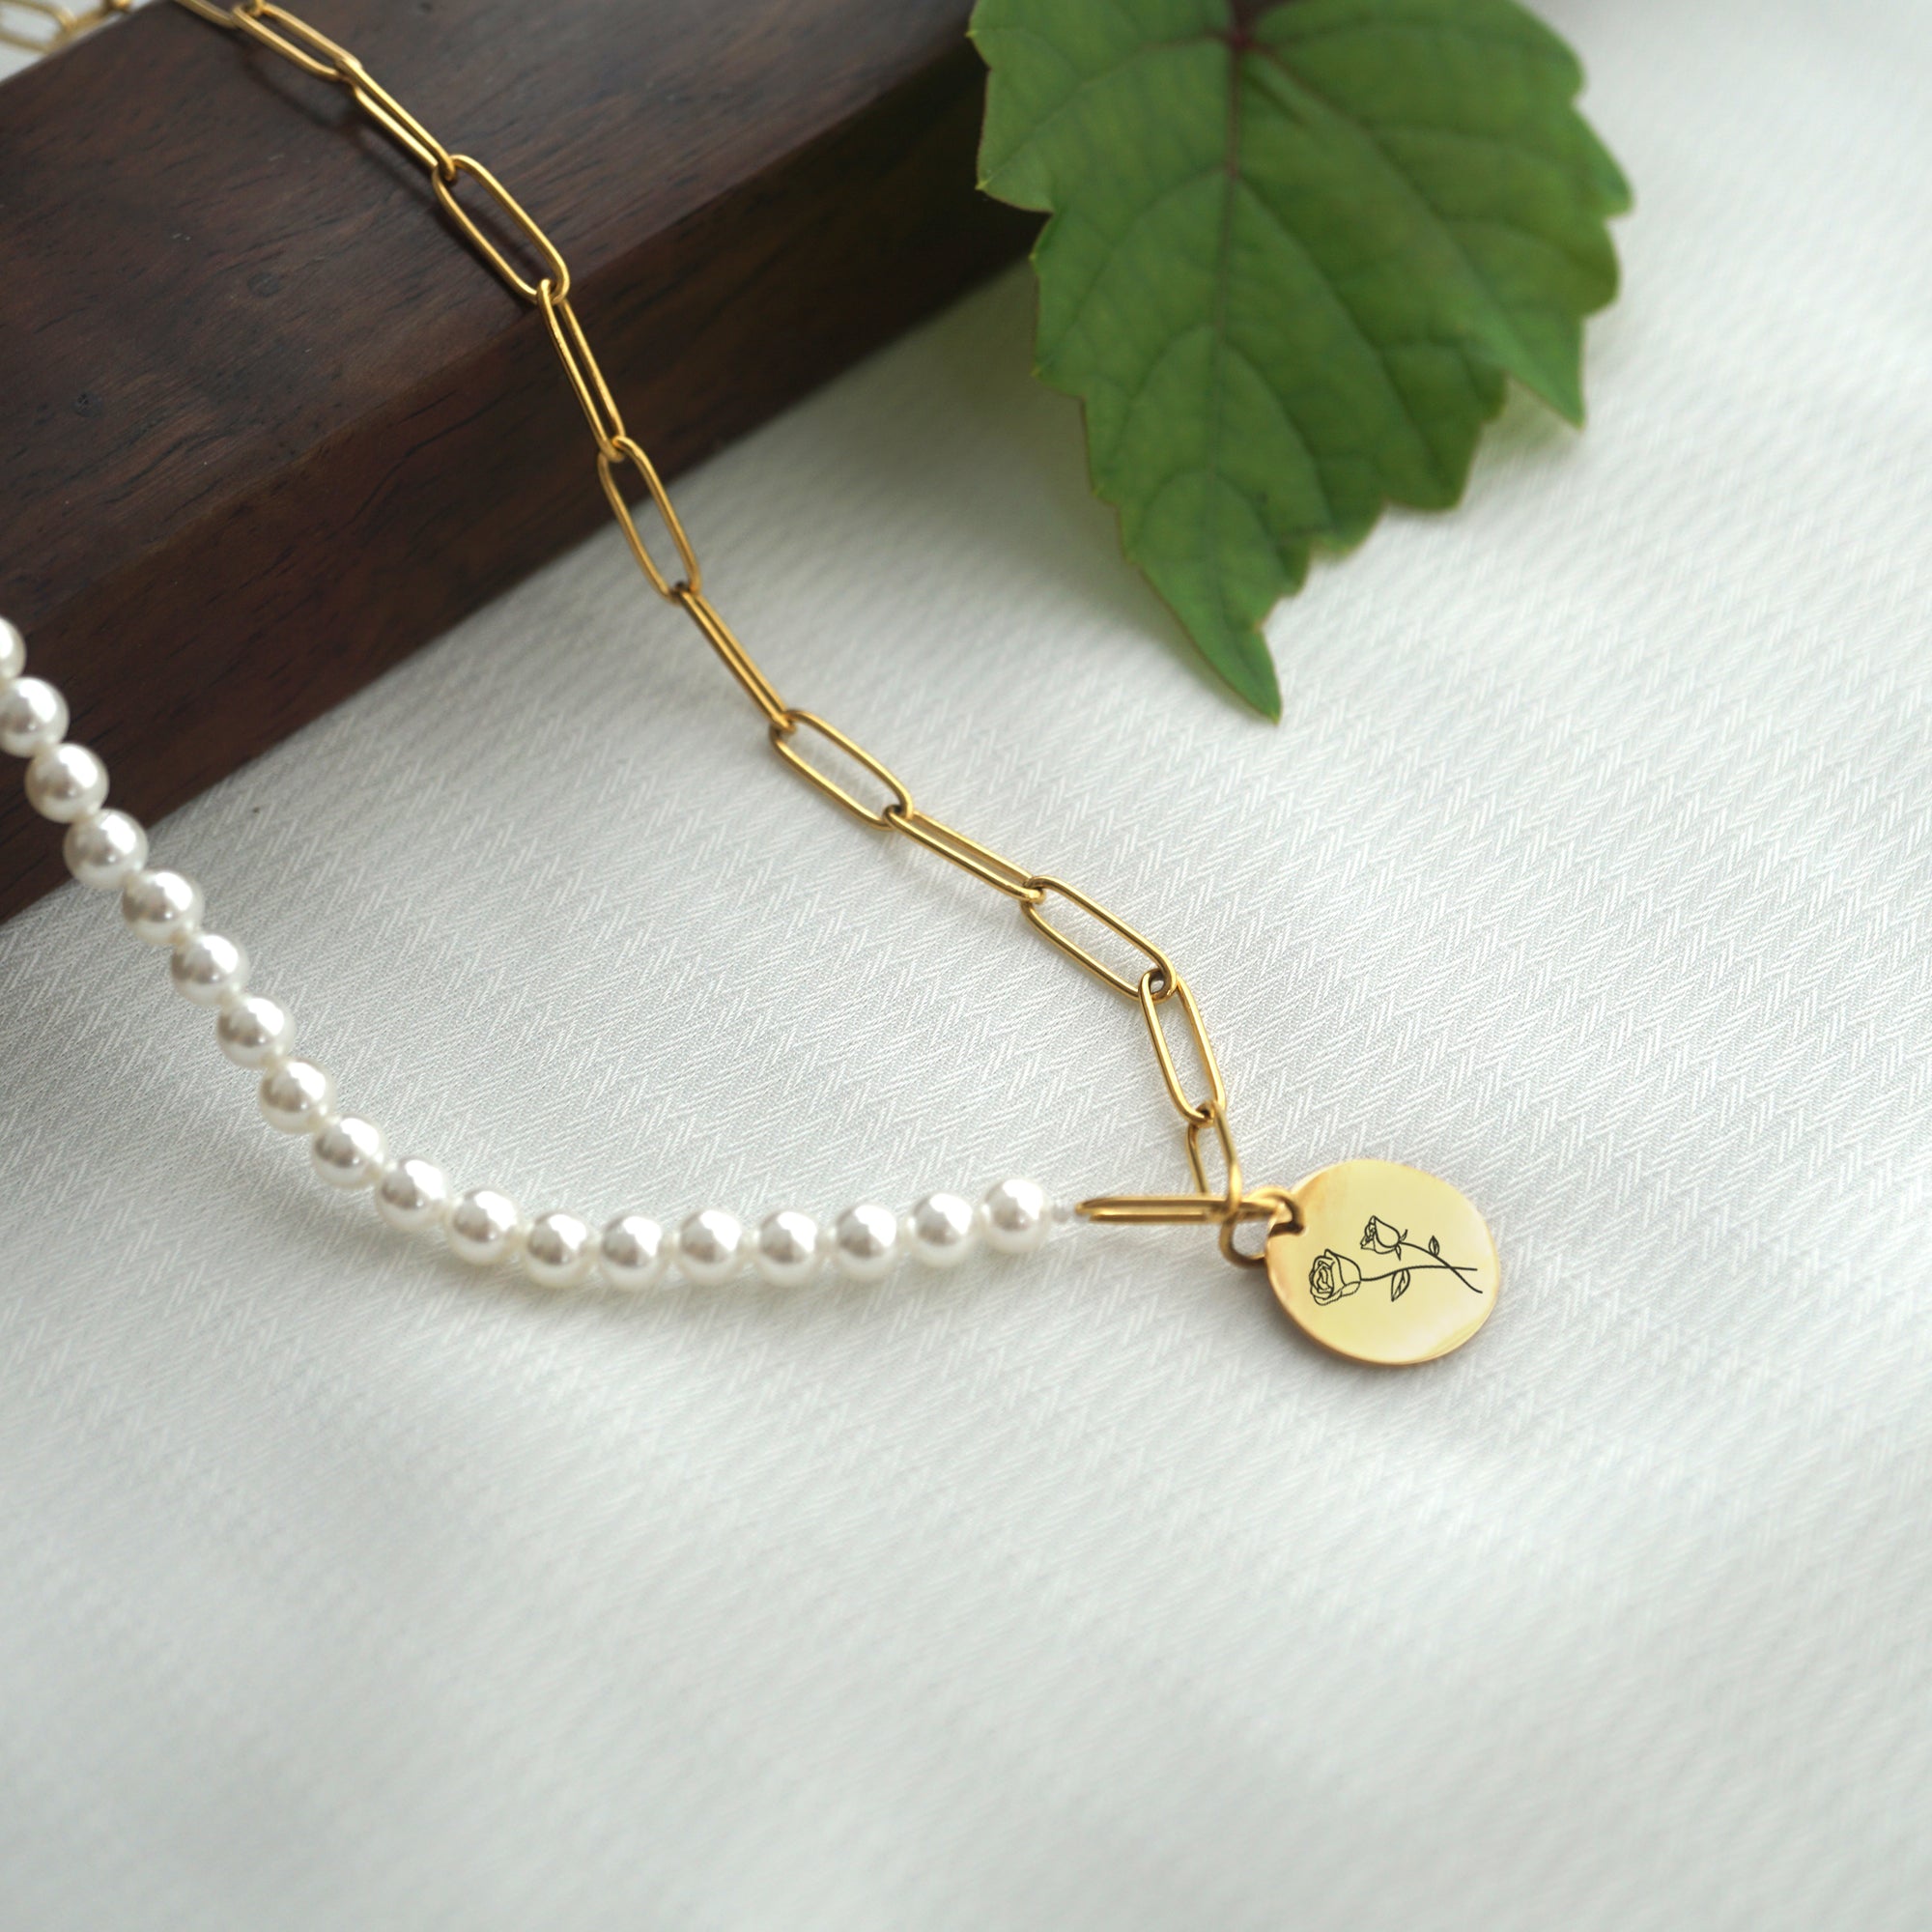 Engraved pearl personalized birth flower pendant necklace